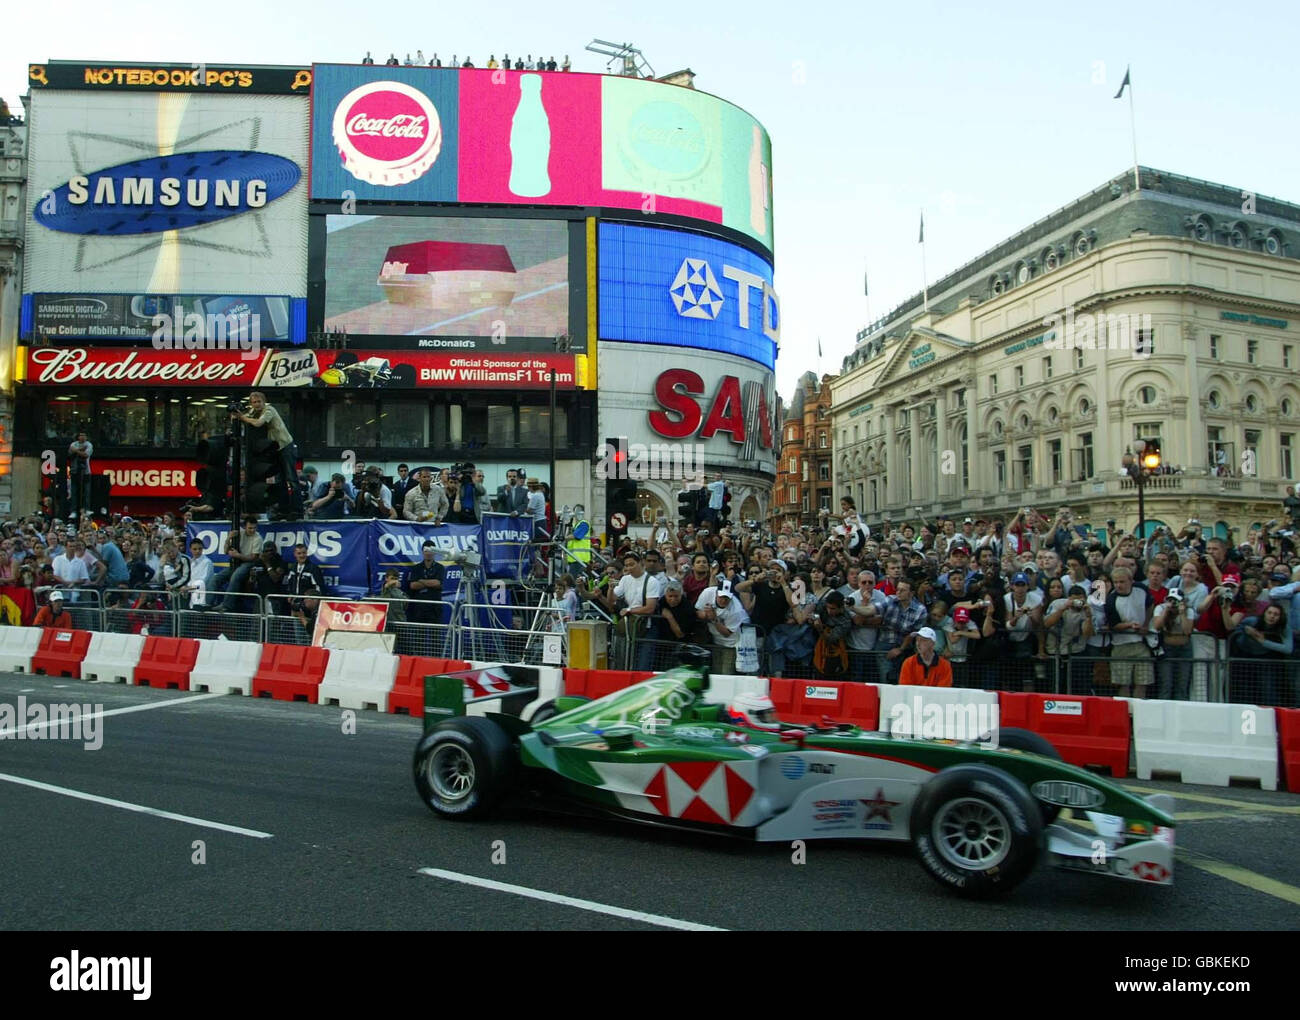 Martin Brundle races along Regent Street, London in a Jaguar car as Formula One comes to the capital. Thousands of Formula One fans gathered for the unprecedented street motor racing event amid calls for a permanent Grand Prix to be staged there. Top drivers old and new arrived for this evening's central London event to see the powerful cars drive along the 3km Regent Street course. British legend Nigel Mansell, Jenson Button and Scot David Coulthard were among the participants from eight Formula One teams including Ferrari and Williams to join a procession along the road. Stock Photo